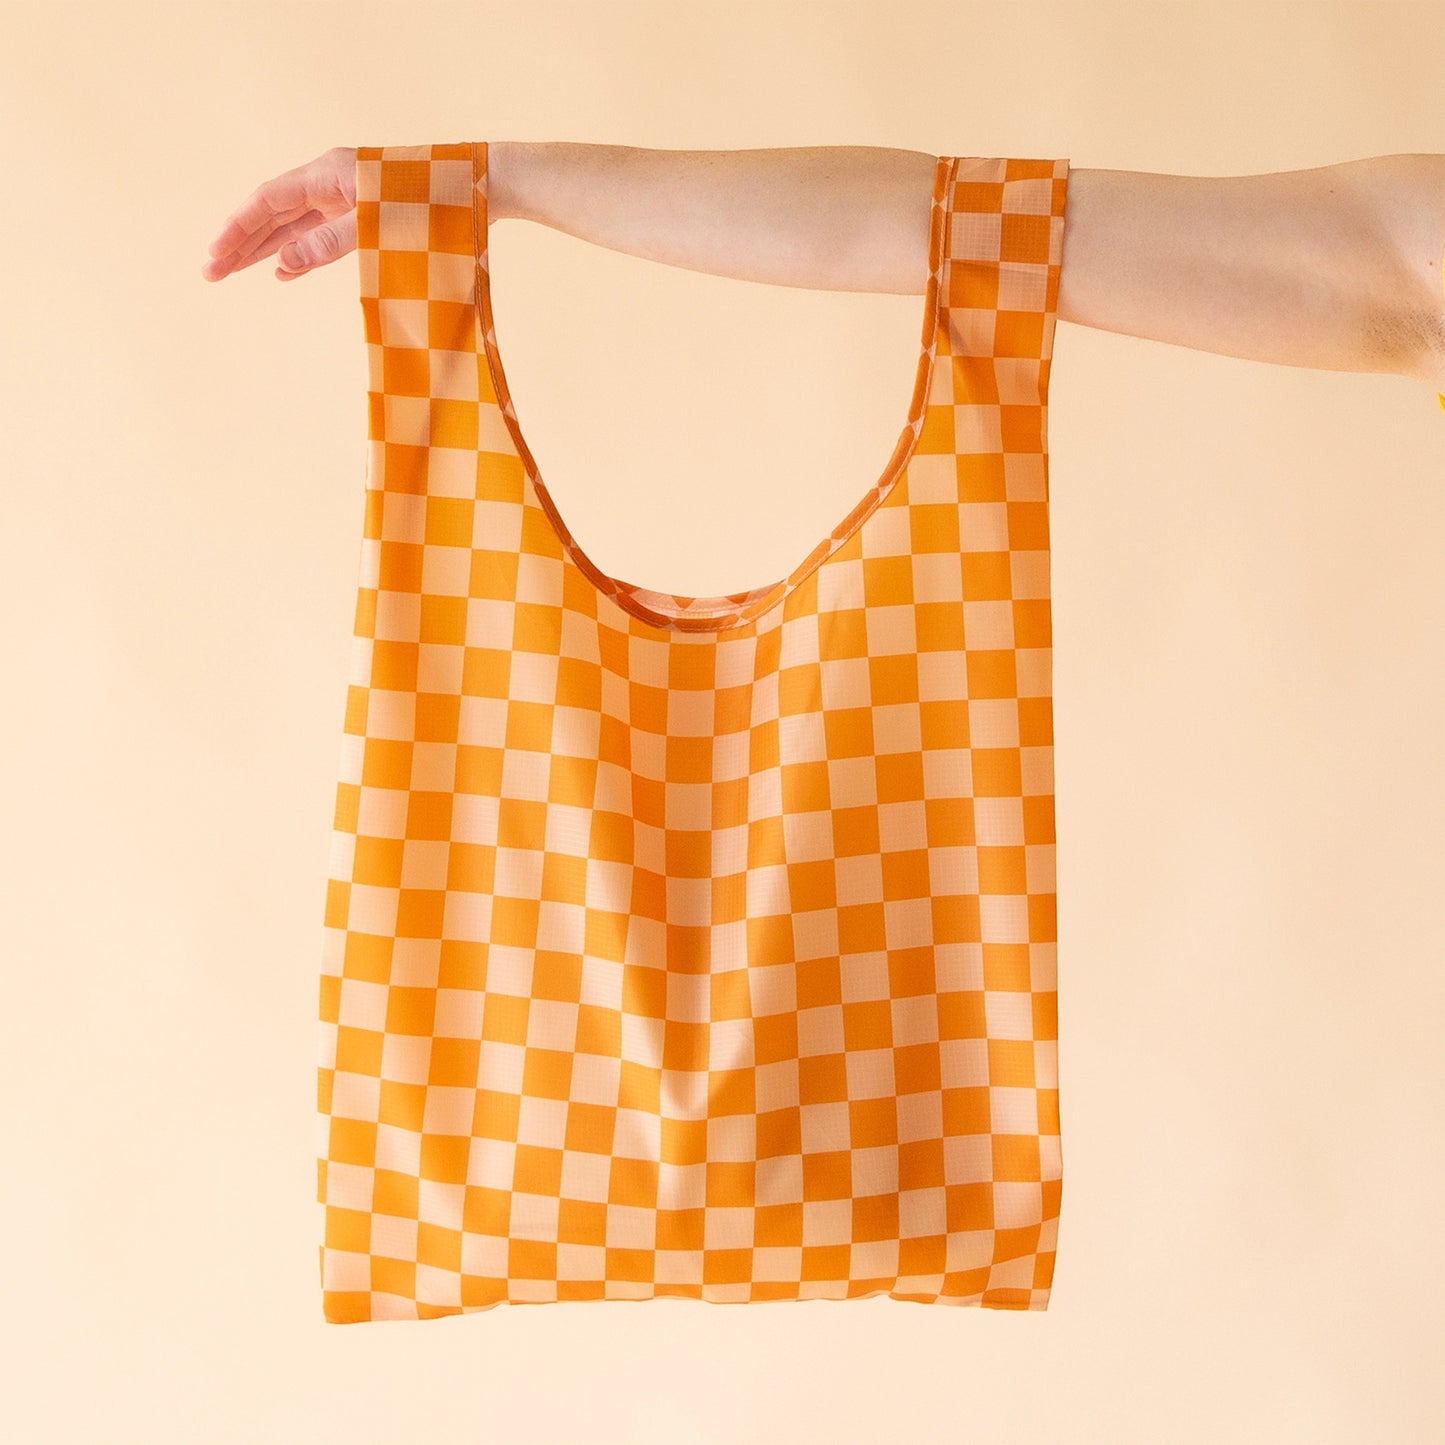 On a light peach background is an orange checkered nylon tote bag being held by a models arm.